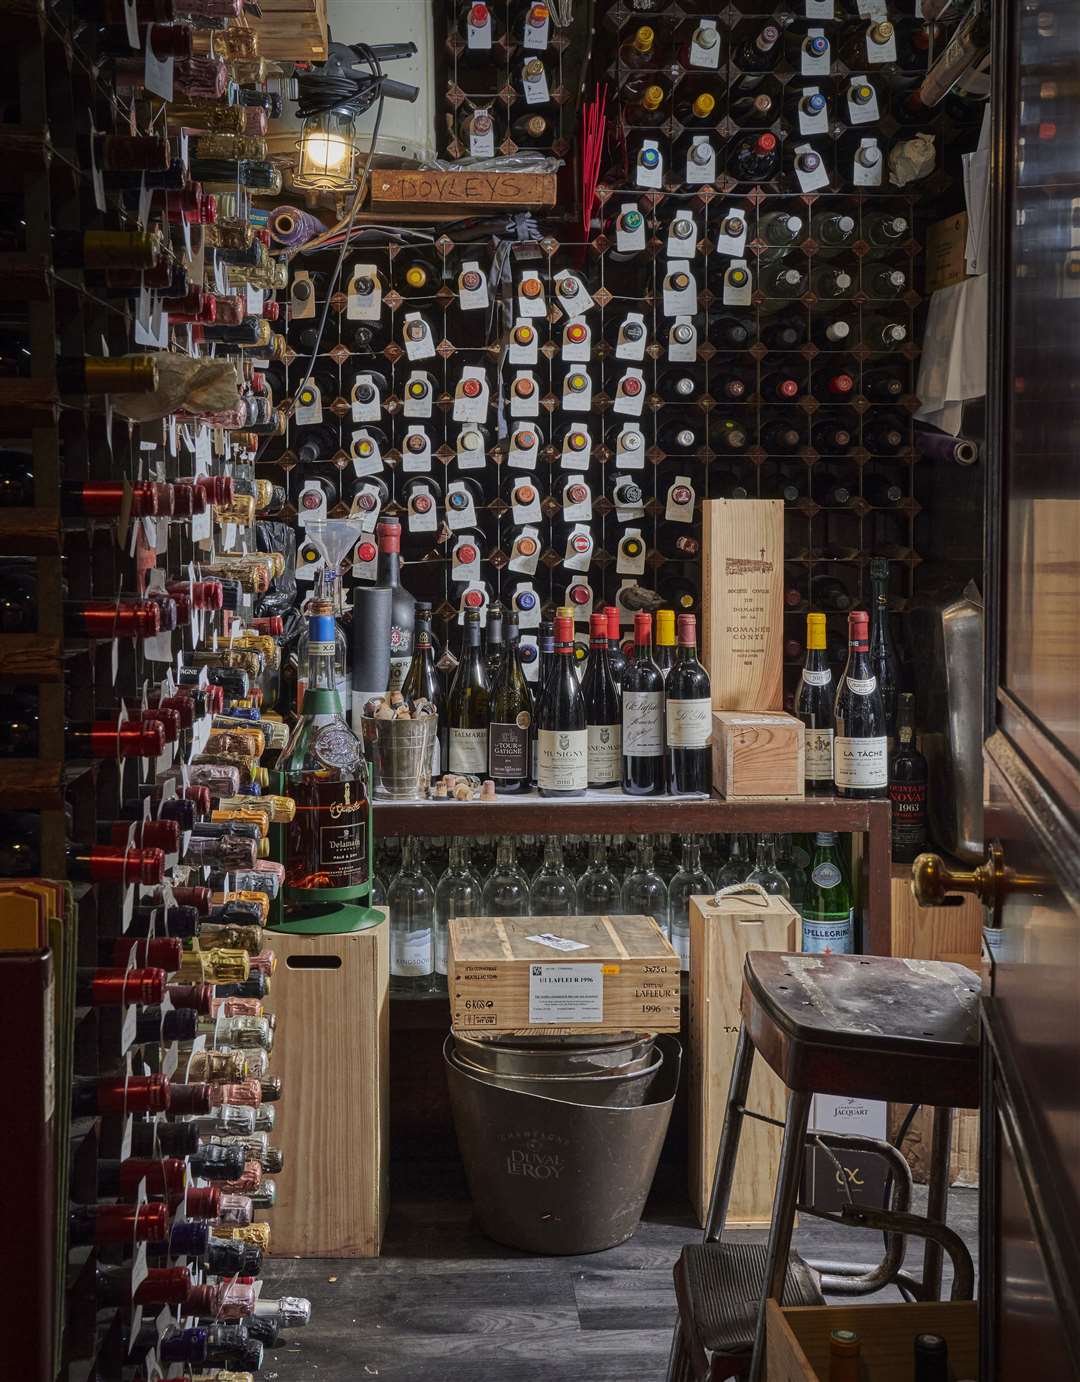 Le Gavroche had an extensive and specialised wine cellar (Christie’s Images Ltd/PA)